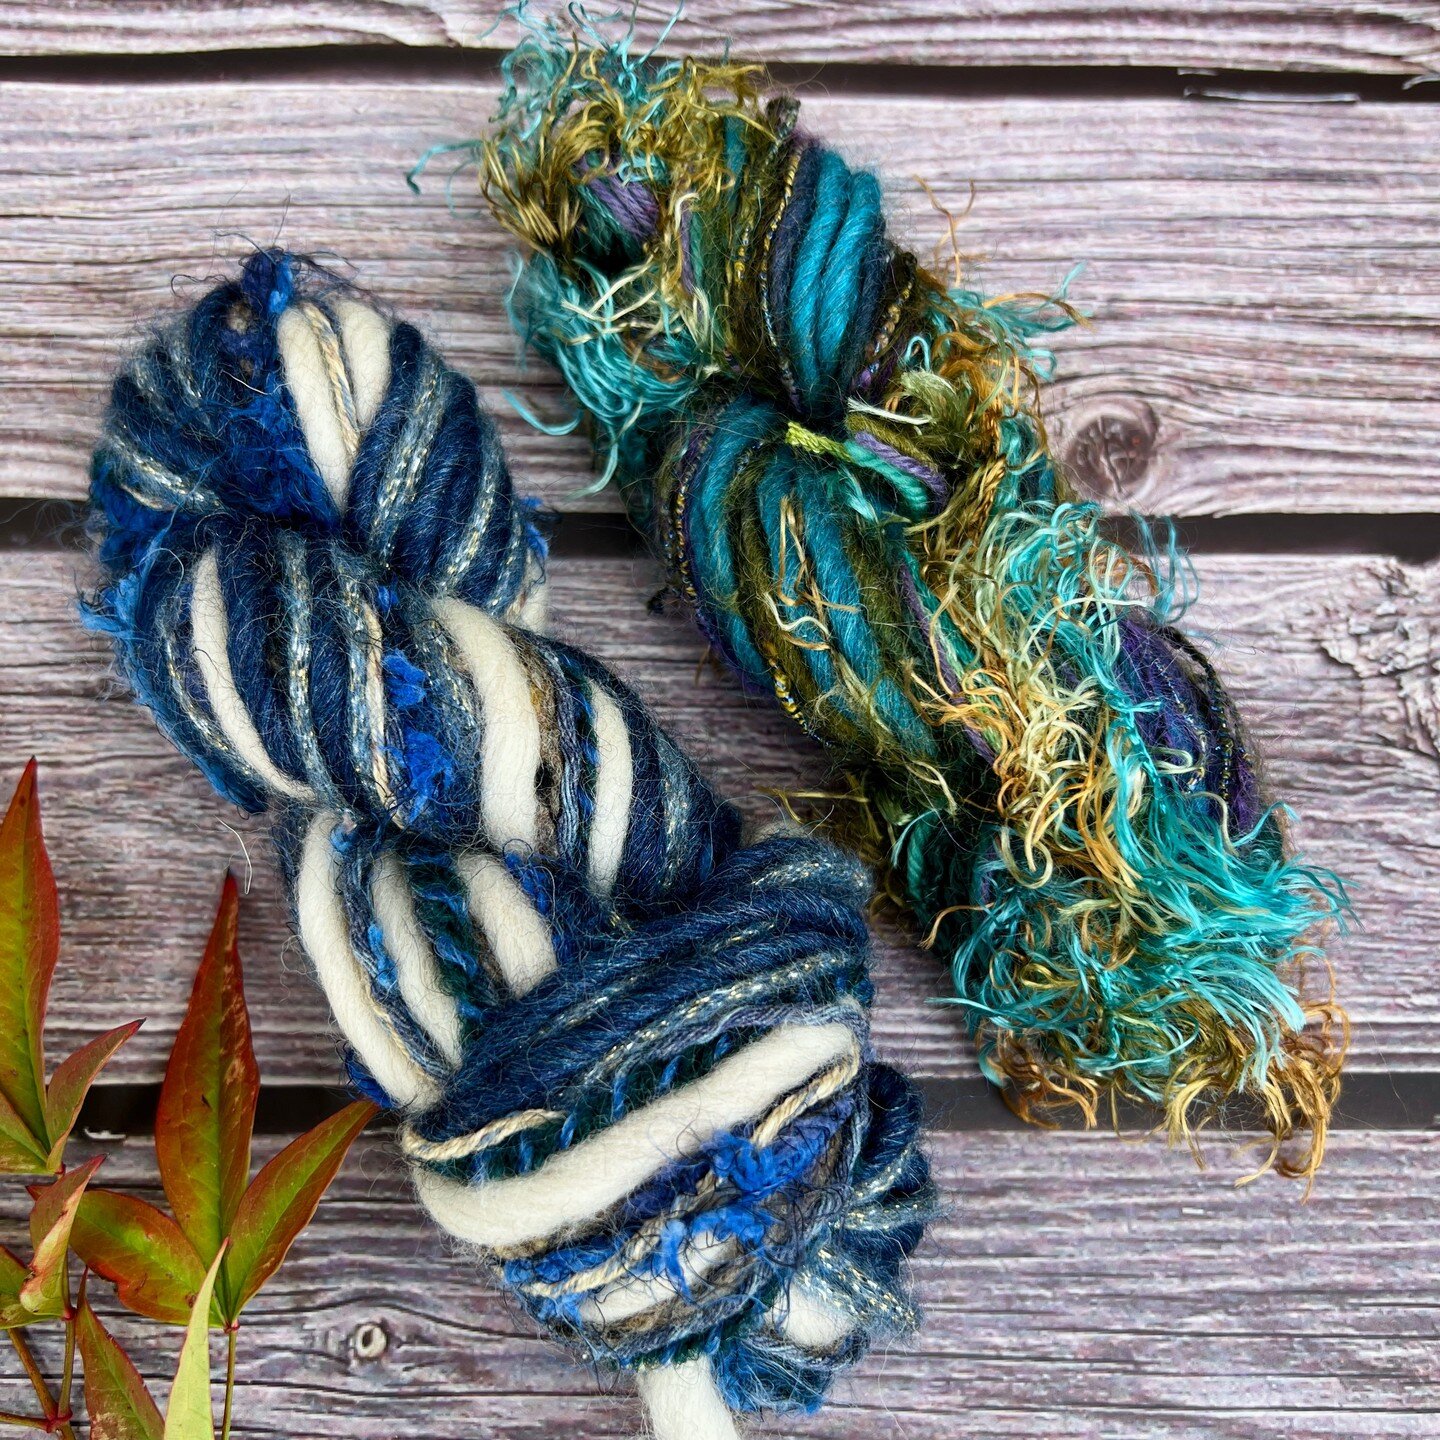 Sustainable #artyarn twists in Seaside and Atlantis. Lots of beautiful, cool colors and textures in these bundles. Find these and other colorways in my @etsy store (see link in bio) #sustainablefiberlove

Each 32 yard skein features a variety of 8 vi